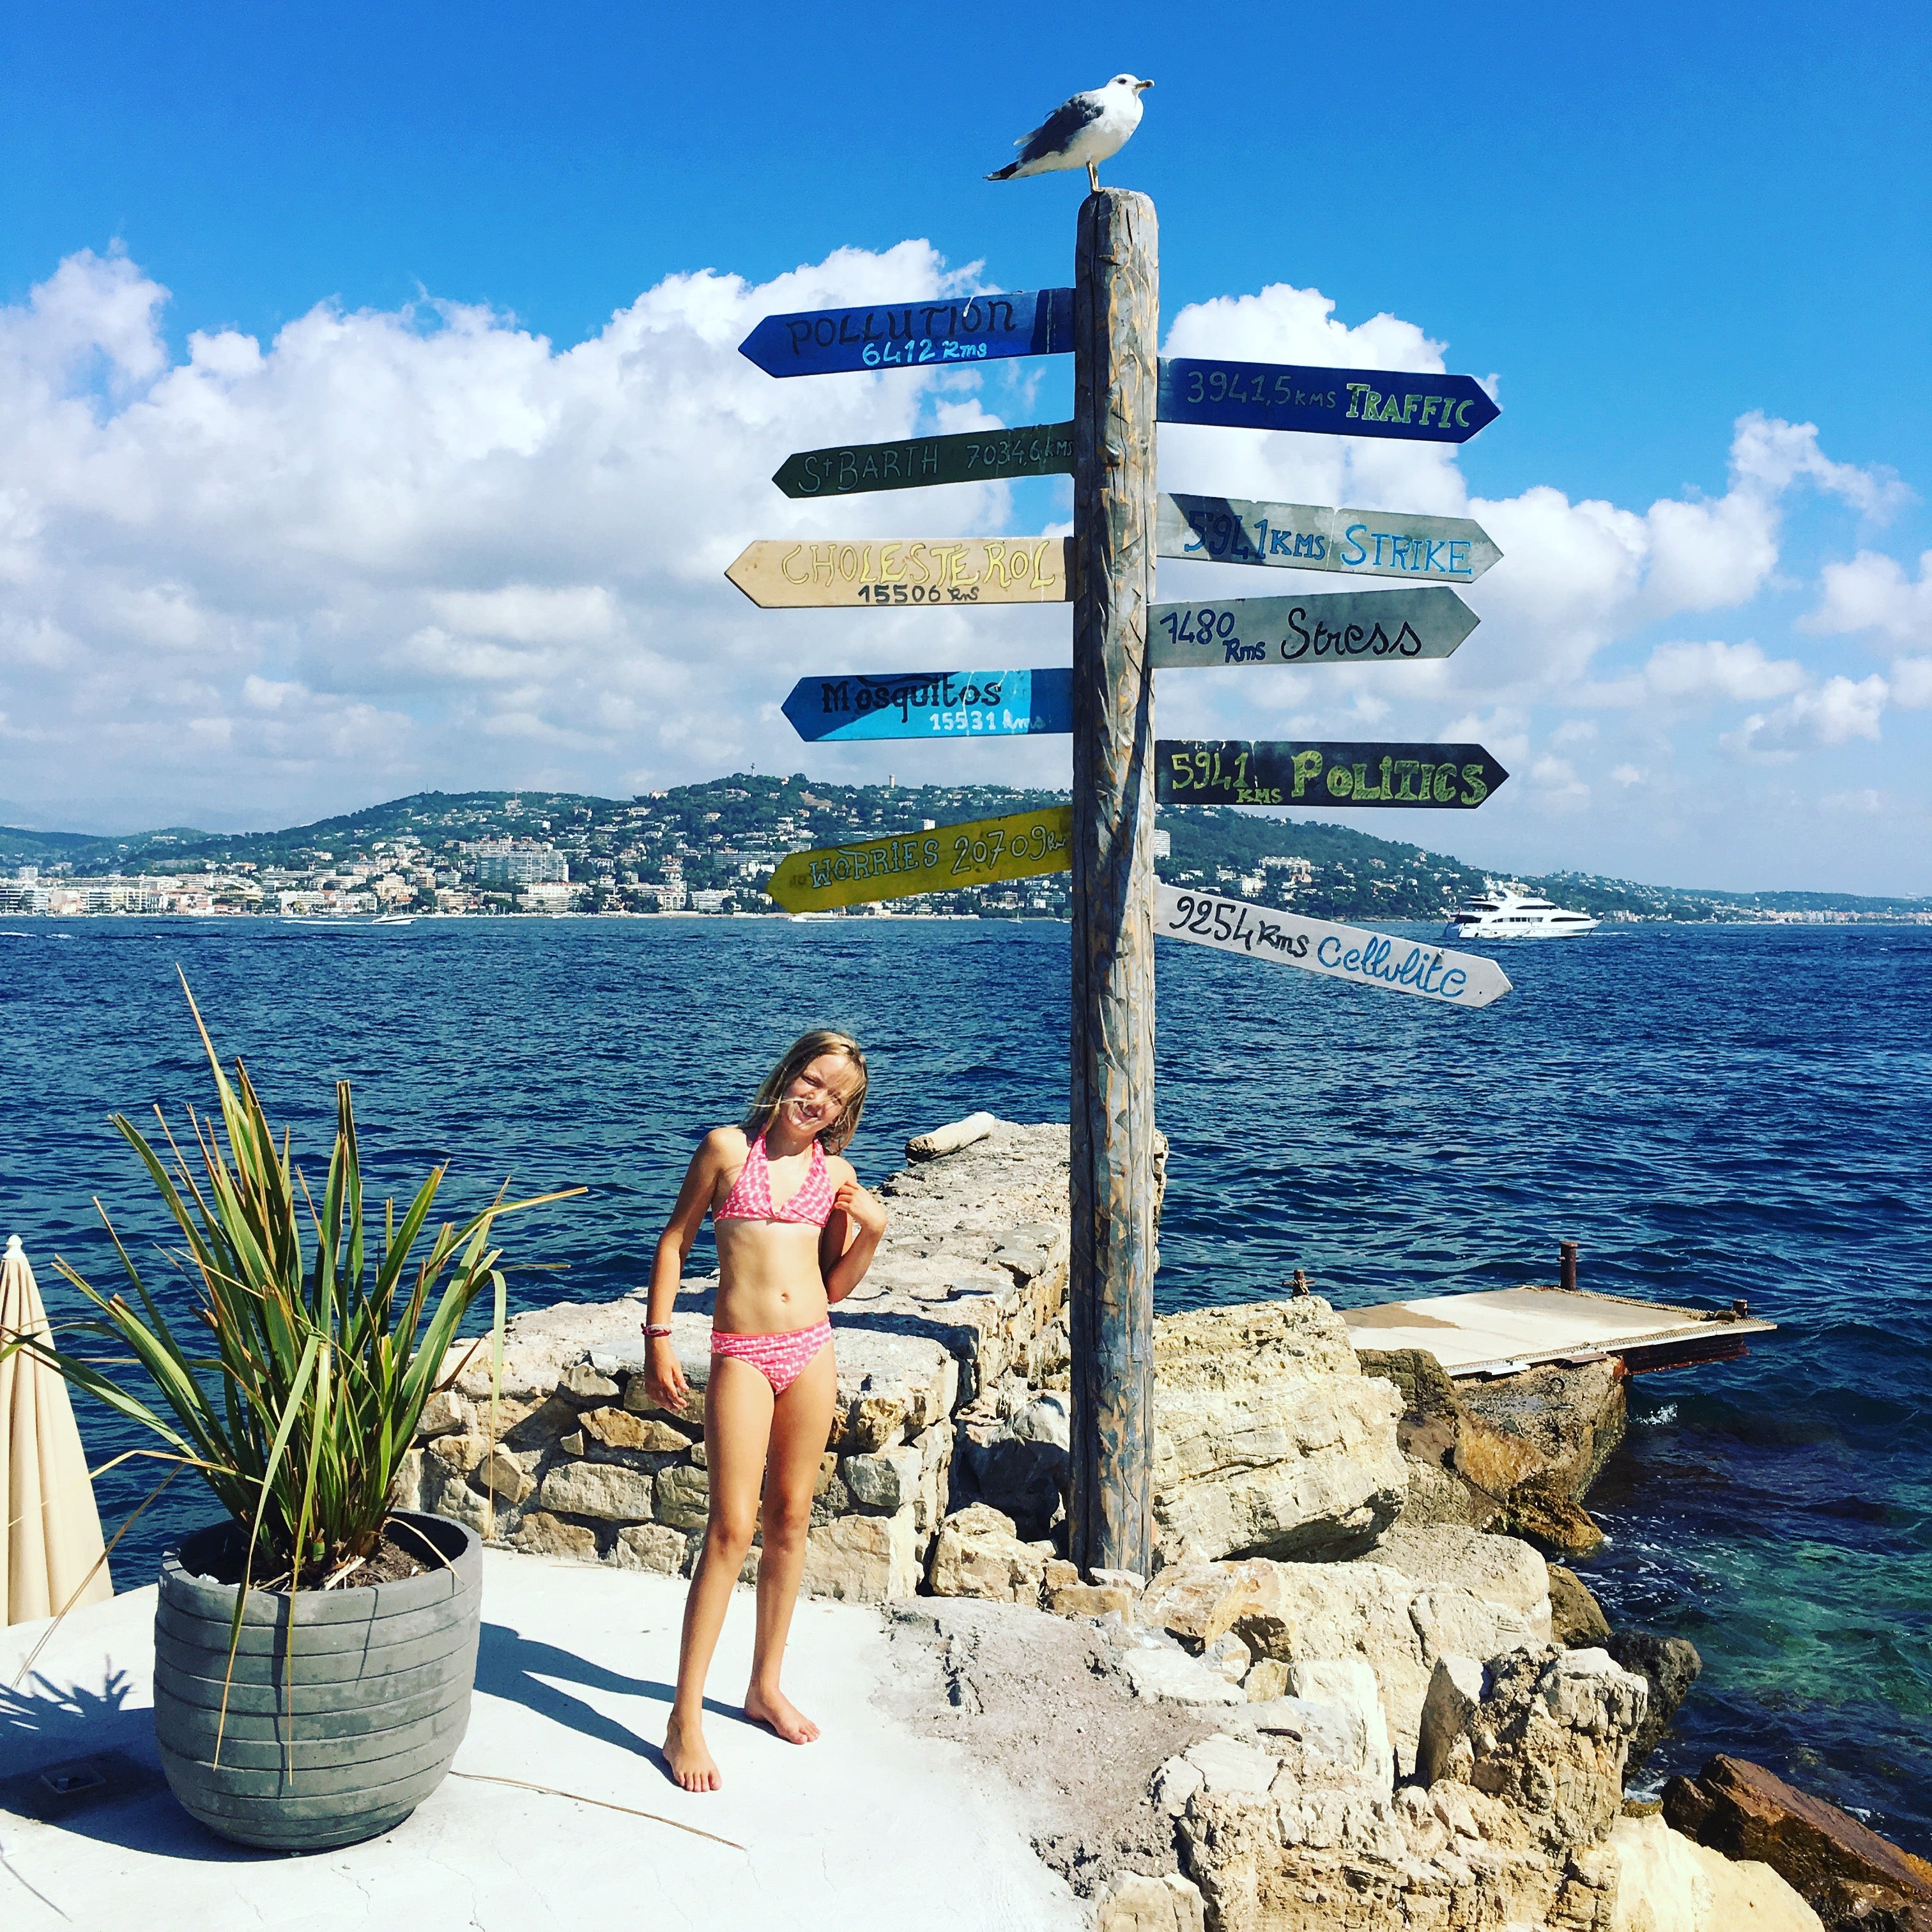 South of France: Part 2 - Let’s travel the world together and find out to how to check the world off your bucket list, one adventure at a time! Read Pickett's Press' travel blogs for inspiring tips and tricks.